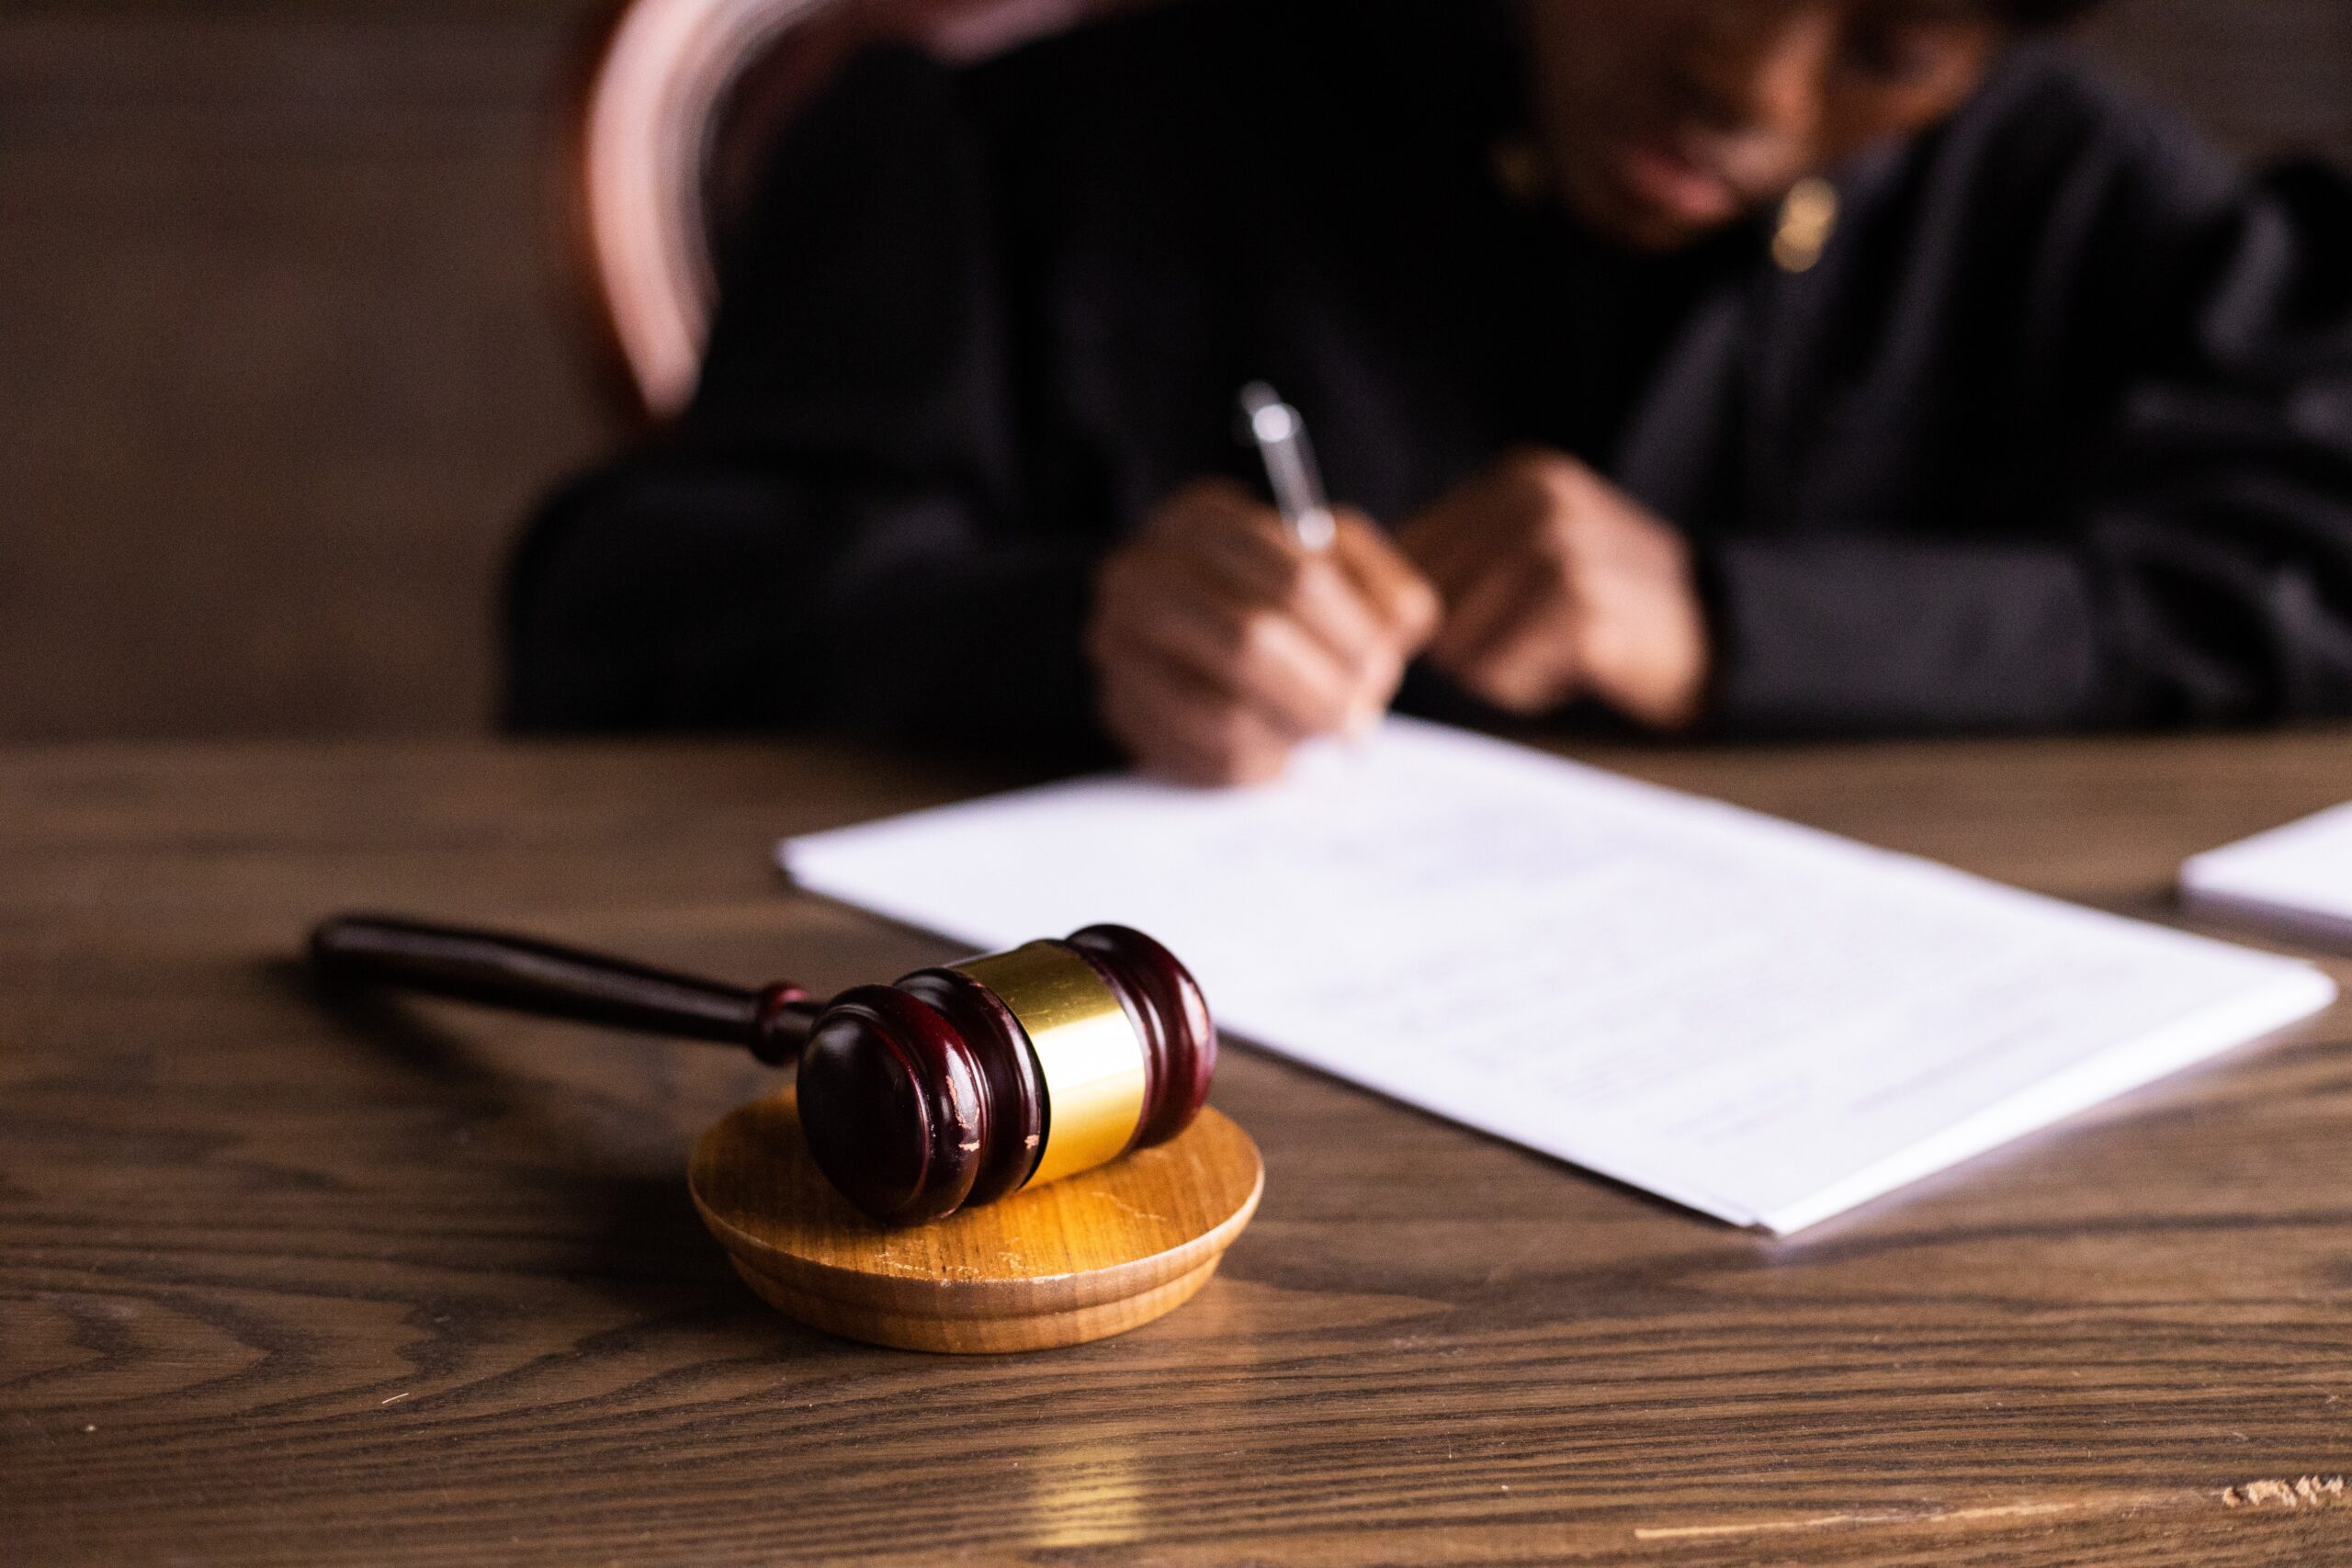 A lawyer sits at their desk, writing something on a piece of paper in the background and out of focus. In front of them is a gavel.